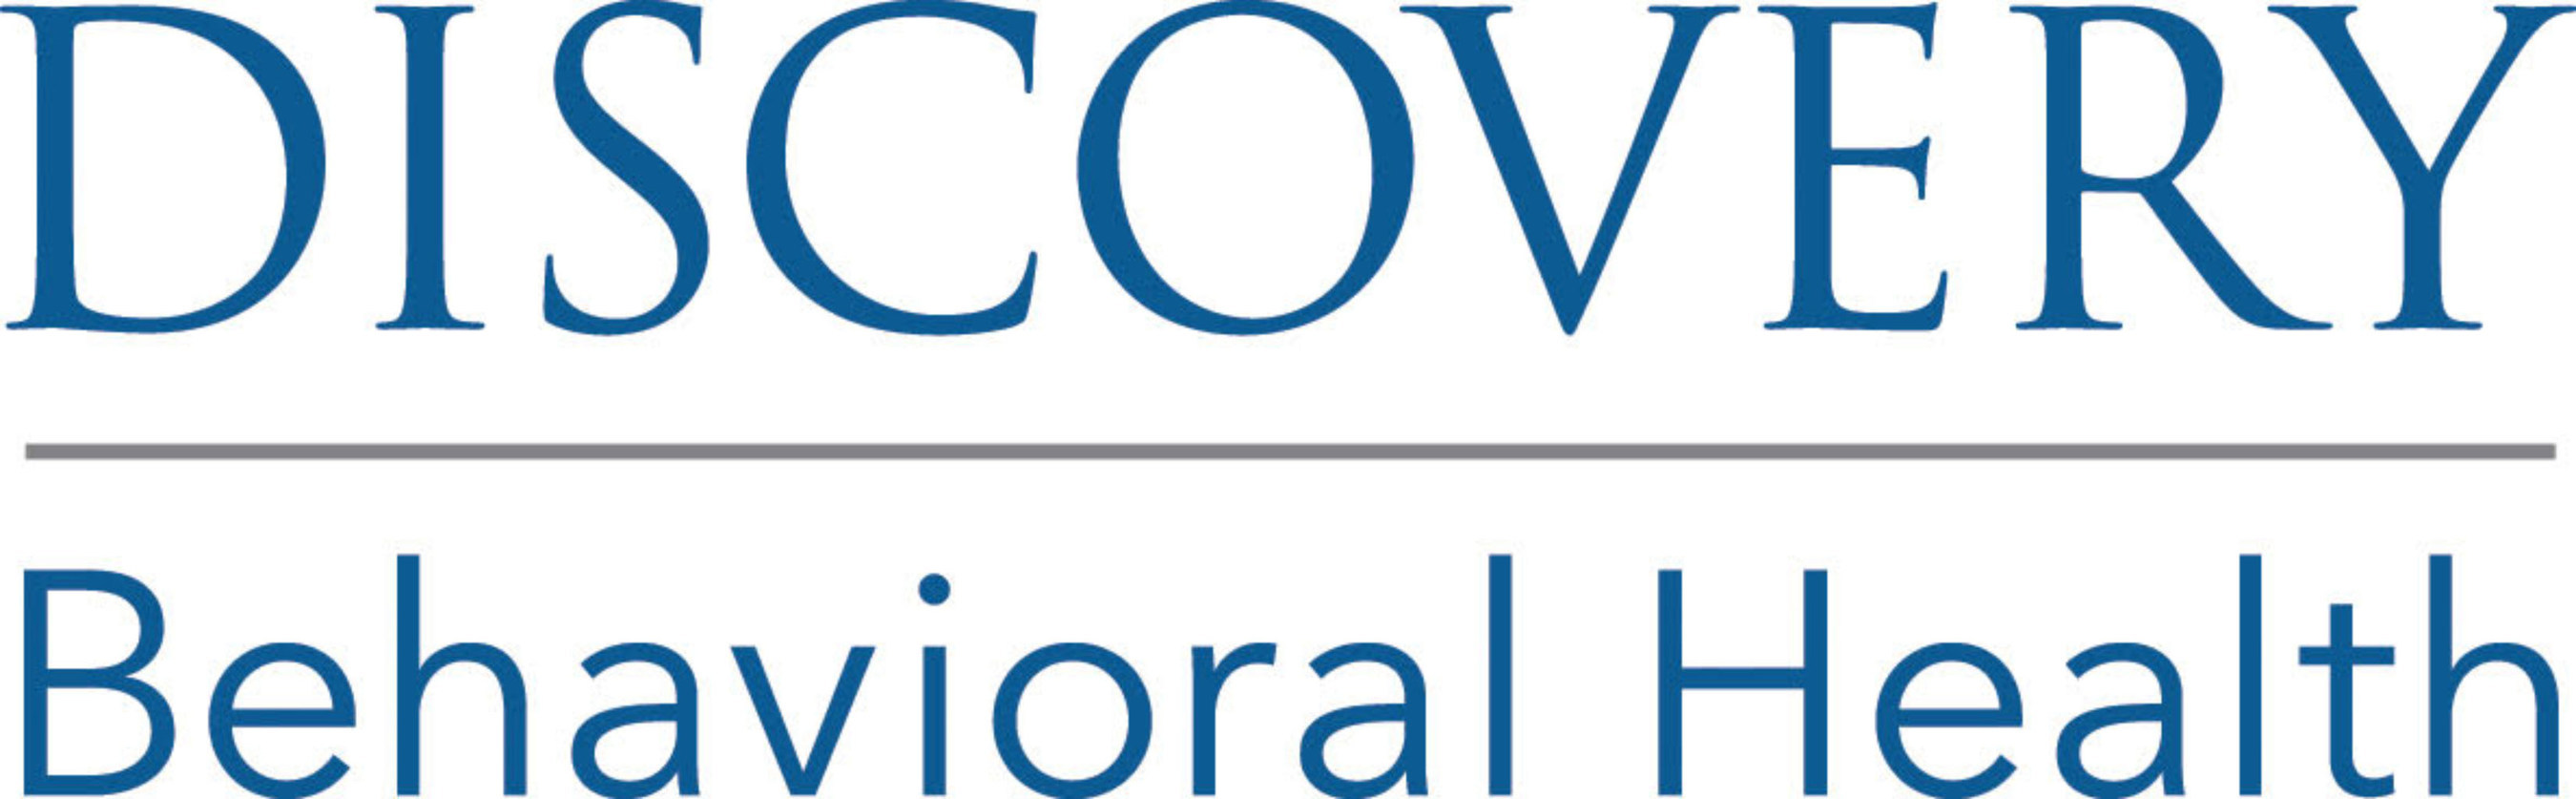 Discovery Behavioral Health Acquires ARC Treatment Center